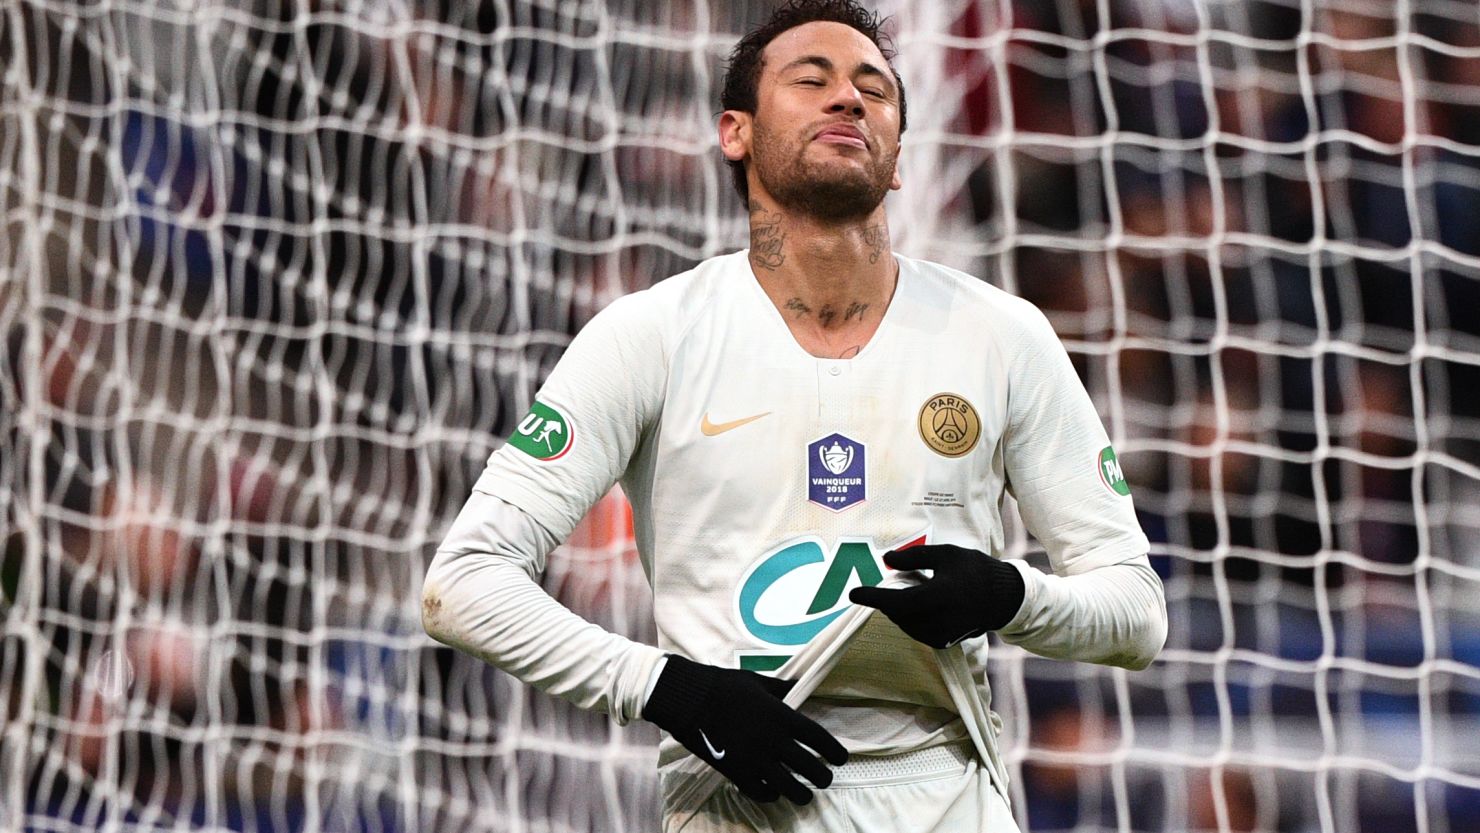 Paris Saint-Germain's Brazilian forward Neymar reacts after missing a shot on goal  during the French Cup final on Saturday at the Stade de France in Saint-Denis, outside Paris. 